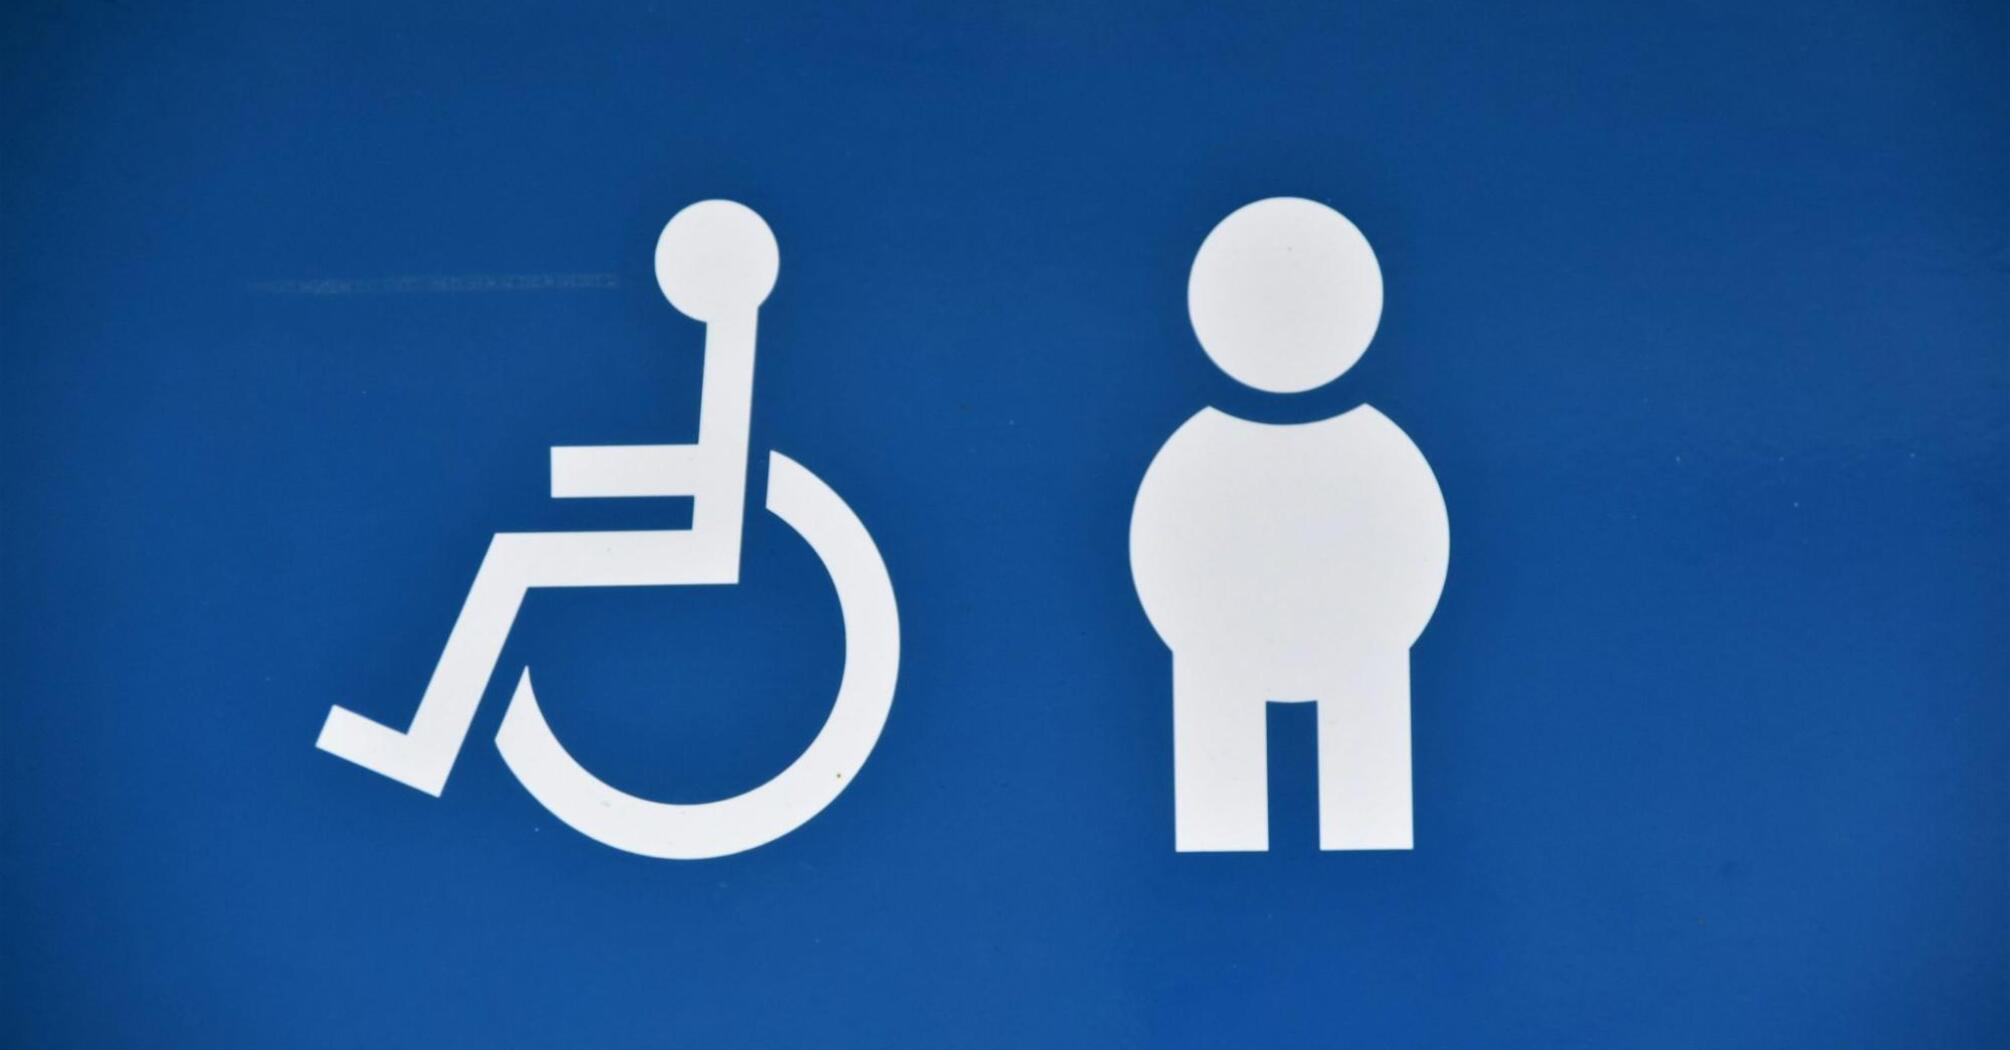 Symbols for disabled and non-disabled access on a blue background